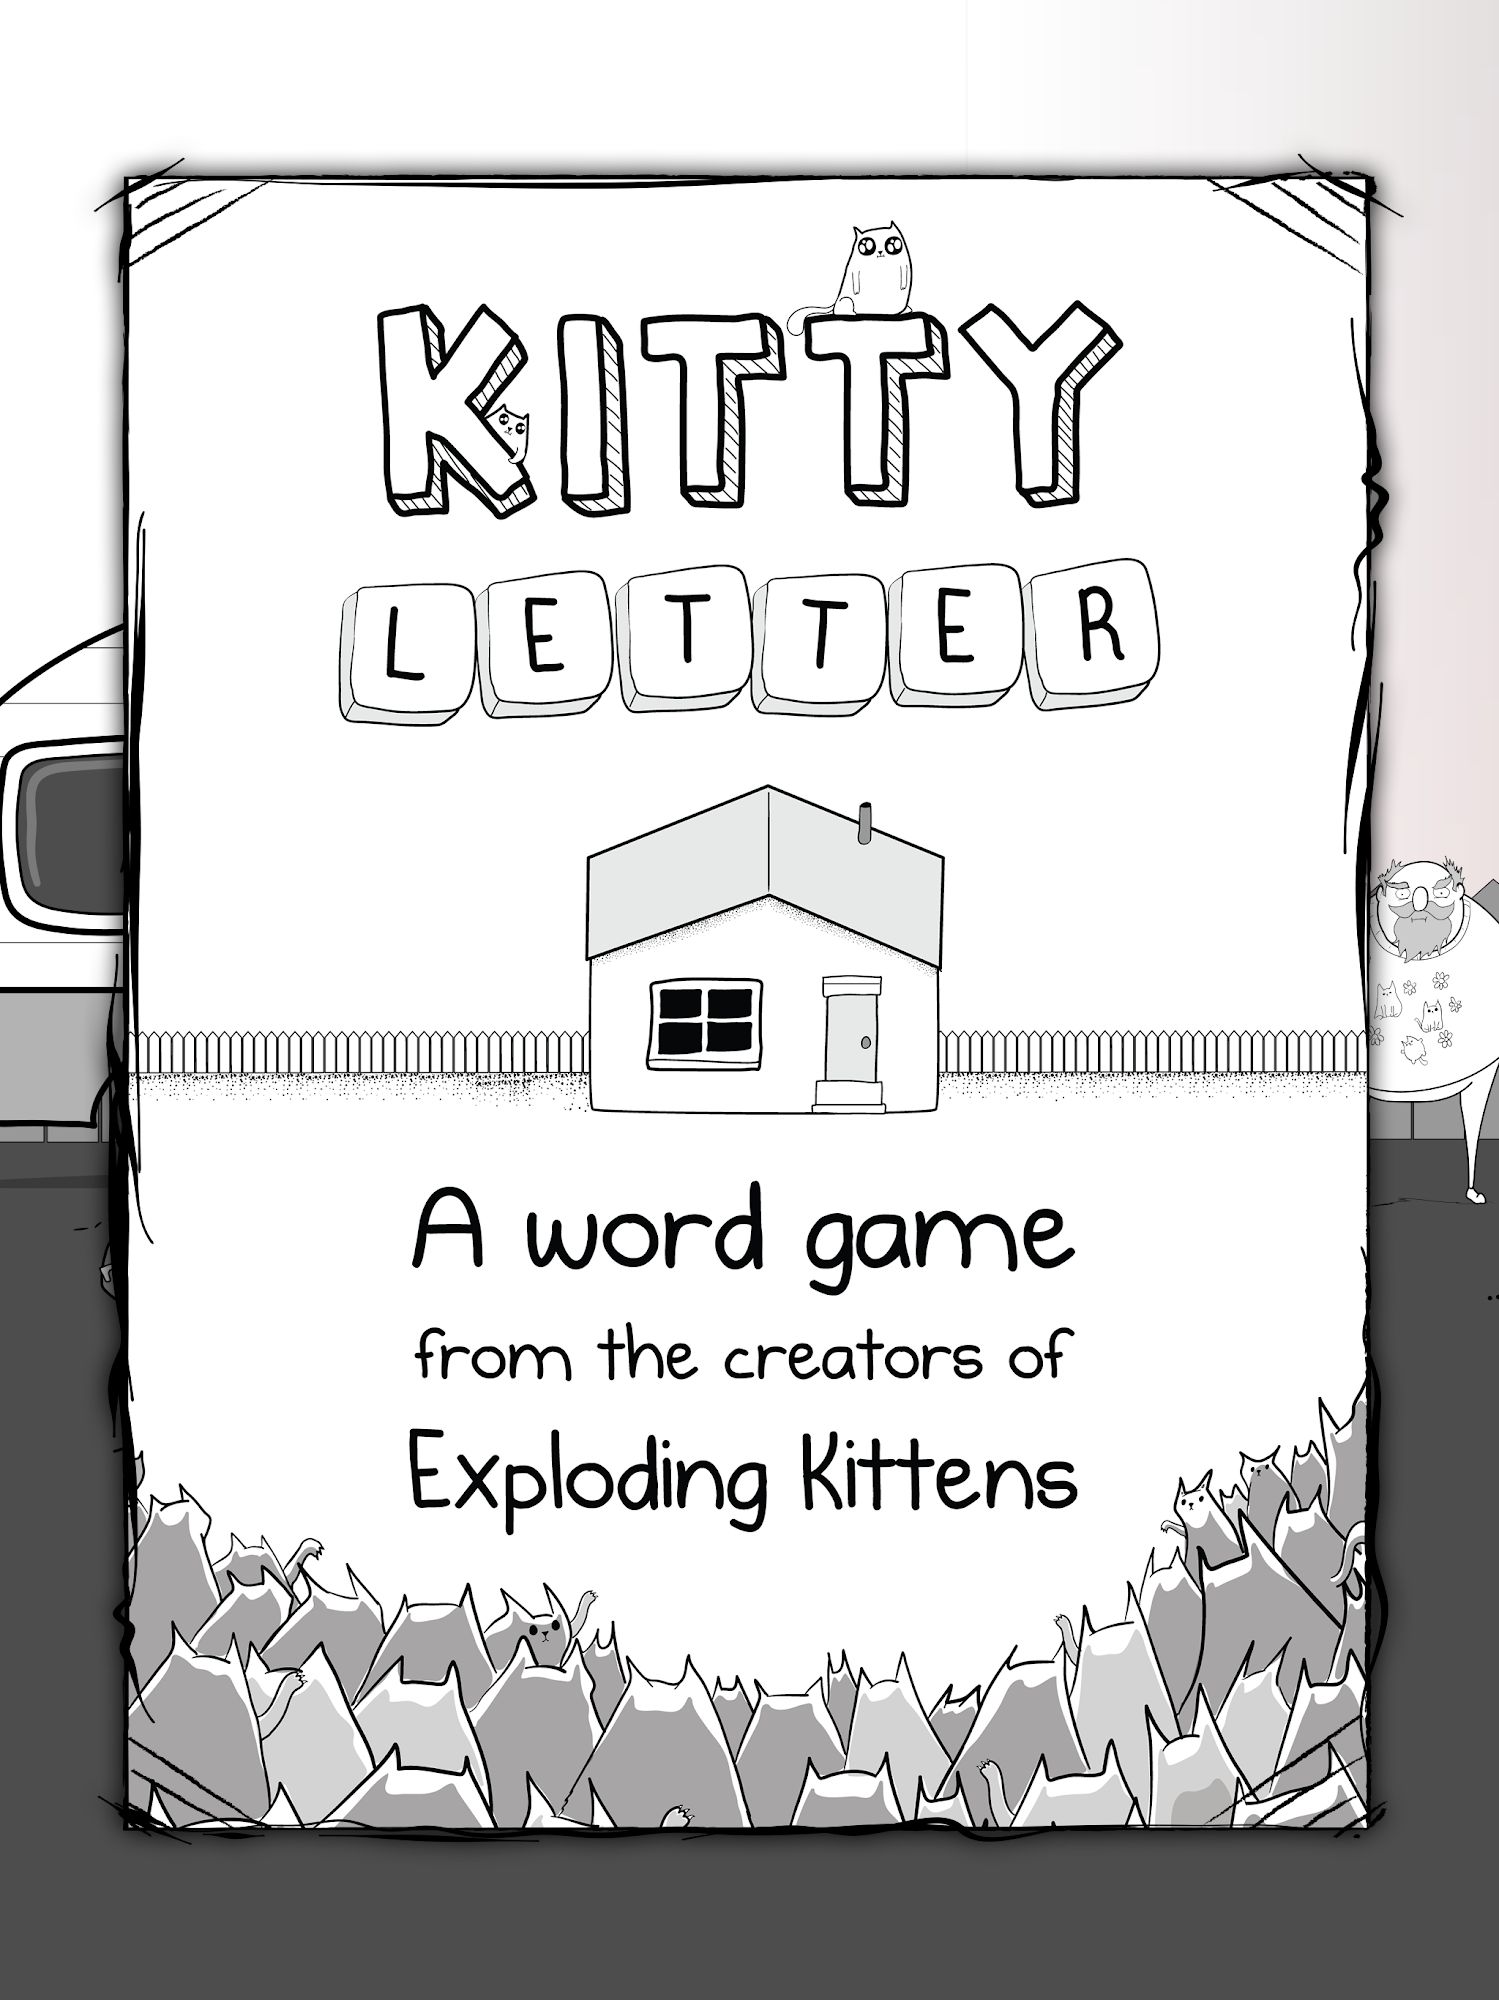 Scarica Kitty Letter gratis per Android.